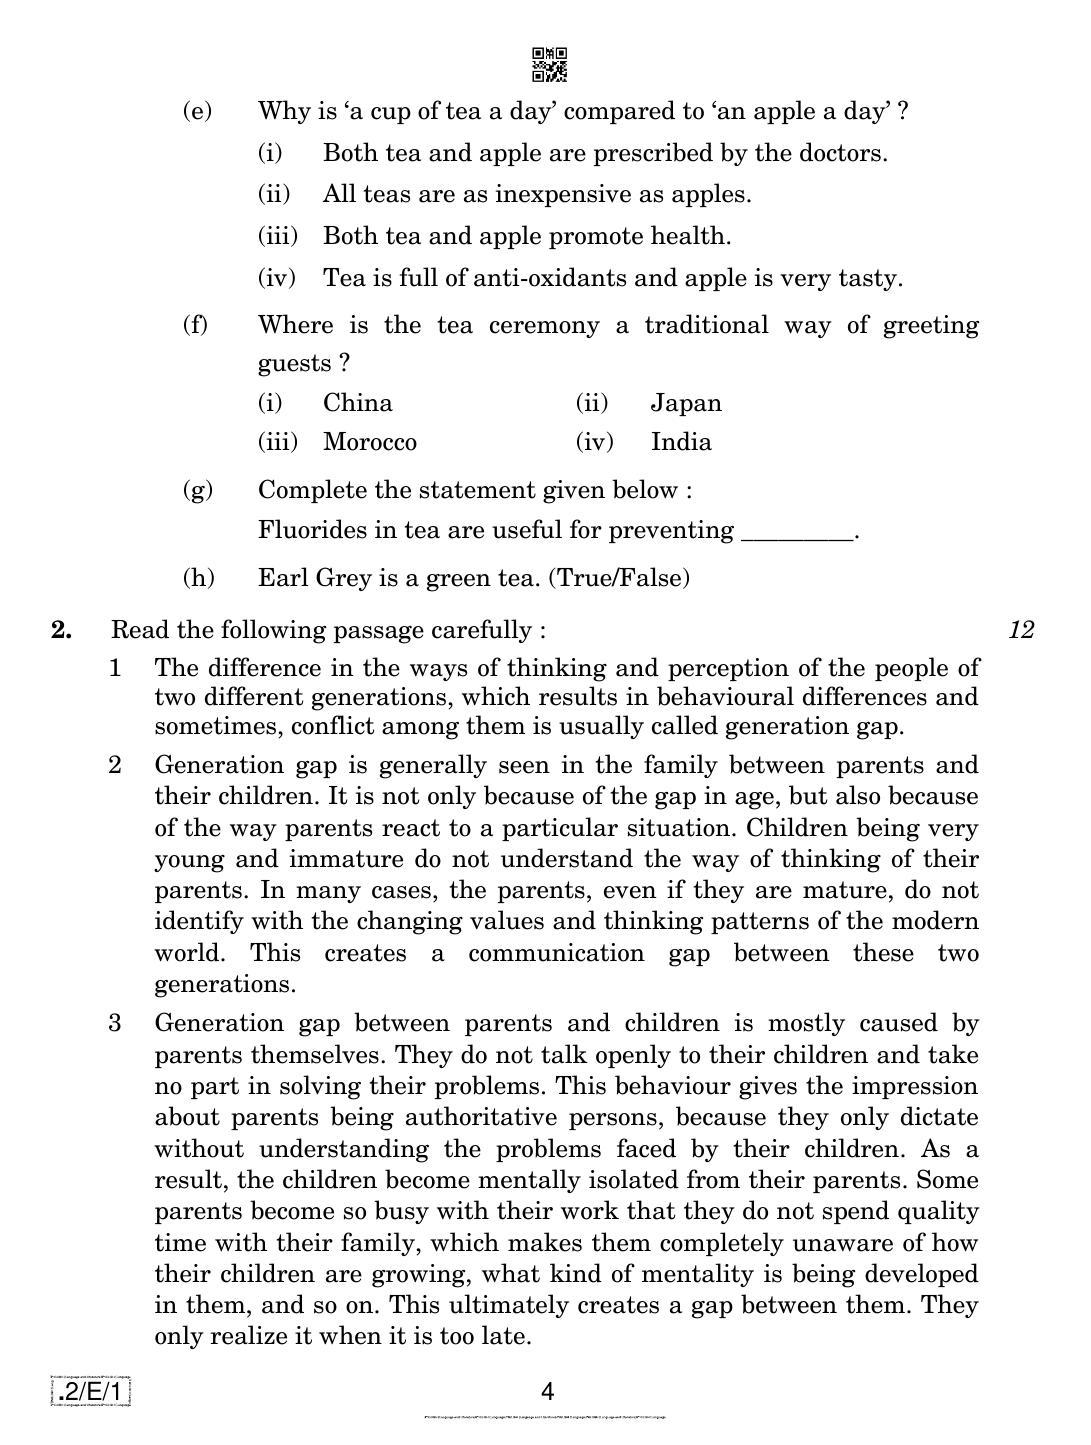 CBSE Class 10 2-C-1 Eng Lang. And Literature 2020 Compartment Question Paper - Page 4